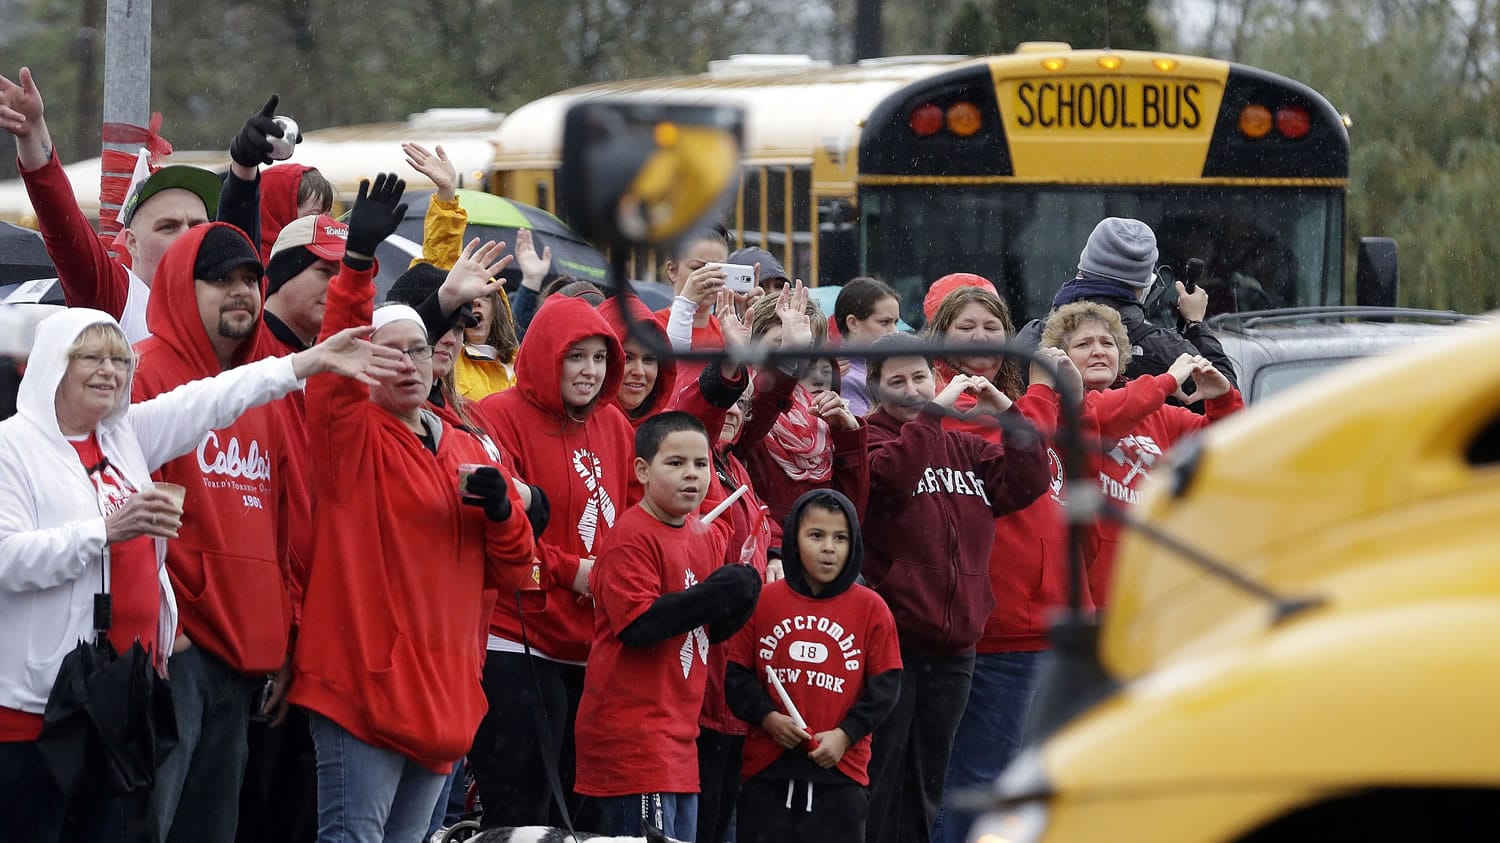 People dressed in the school colors of red and white cheer and wave as school buses carrying students on their return to Marysville-Pilchuck High School drive past Monday, Nov. 3, 2014, in Marysville, Wash. After the shock from the Oct. 24 shooting there that left four students dead, including the shooter, and two students still in a Seattle hospital, administrators and teachers hope to transition to a new routine. The day was scheduled to begin with a morning assembly. Lunch is in the gym because the cafeteria where the shooting took place remains closed.